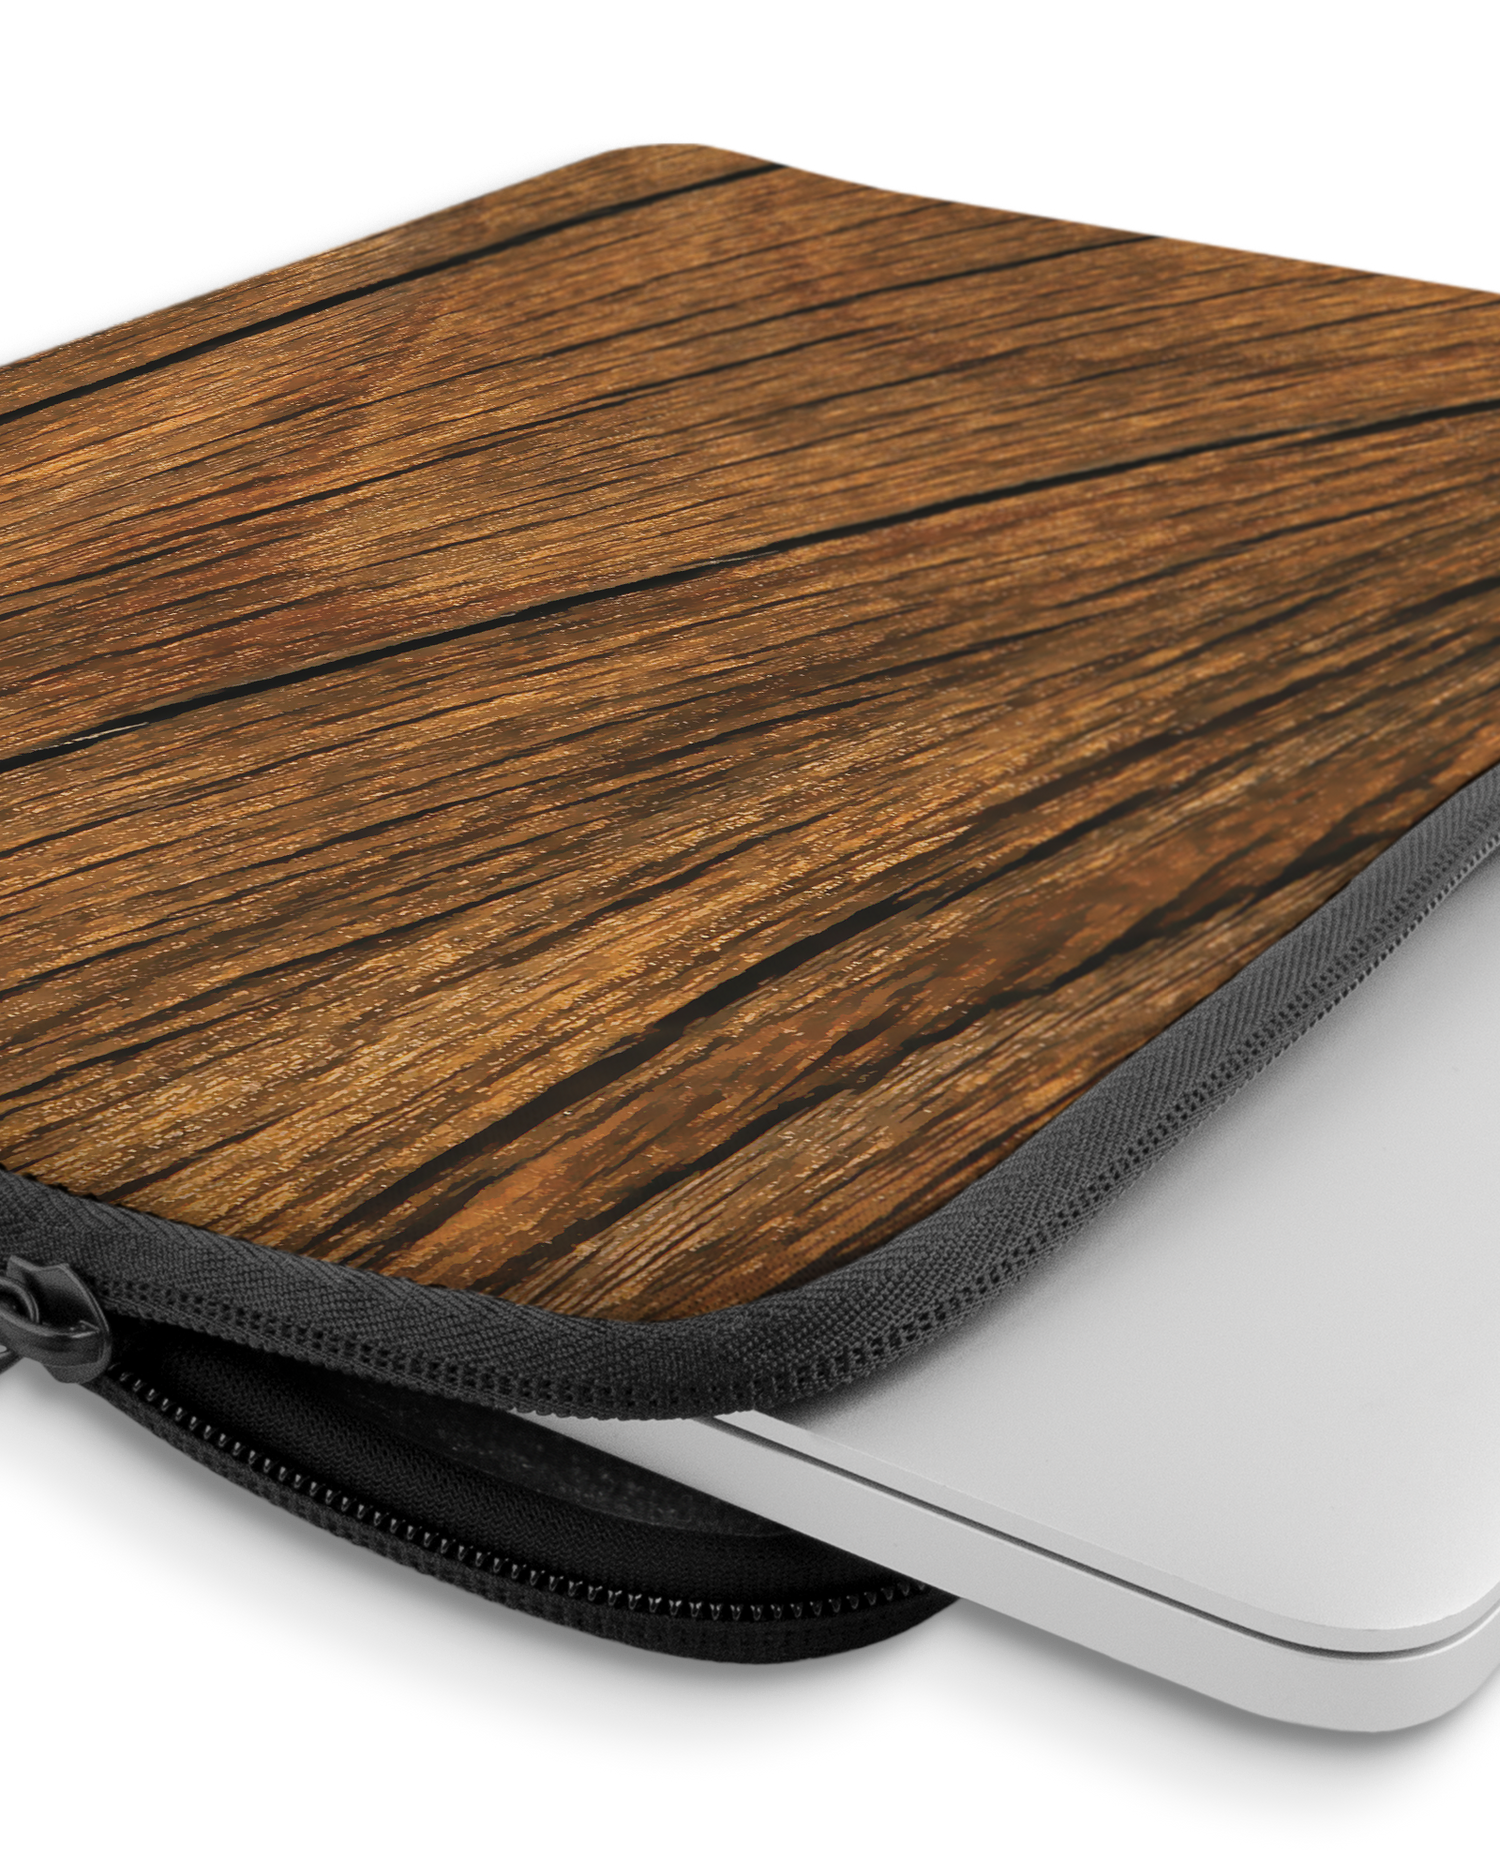 Wood Laptop Case 13-14 inch with device inside